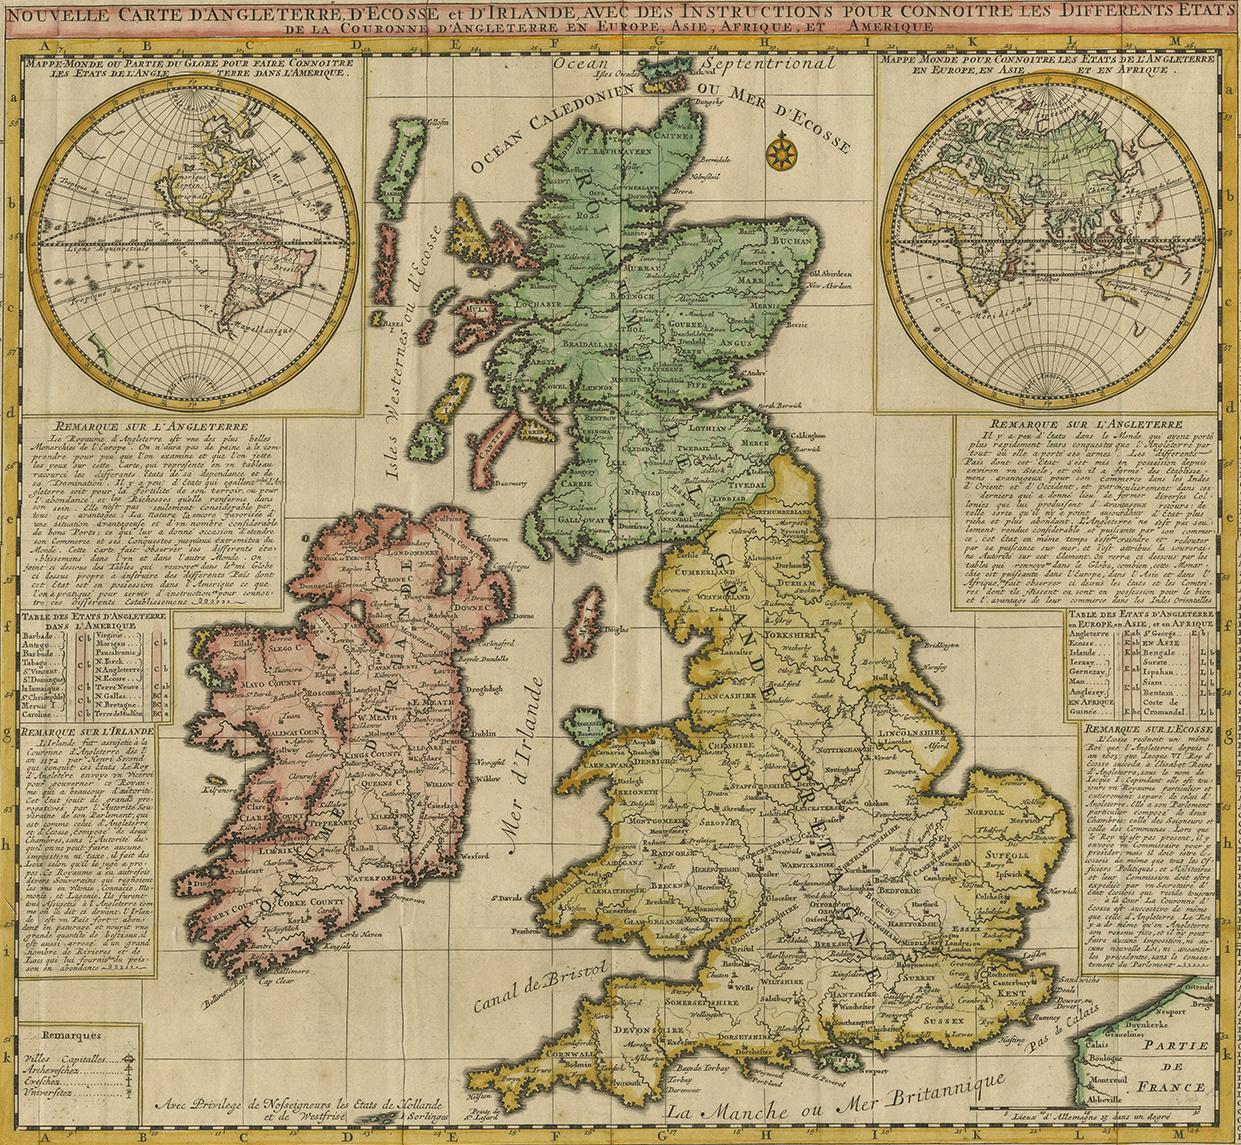 Beautiful hand colored large format map of the British Isles, with large insets of the Eastern and Western Hemispheres and the coats of arms for England, Ireland, Scotland and Wales. From Chatelain's monumental 7 volume Atlas Historique, one of the